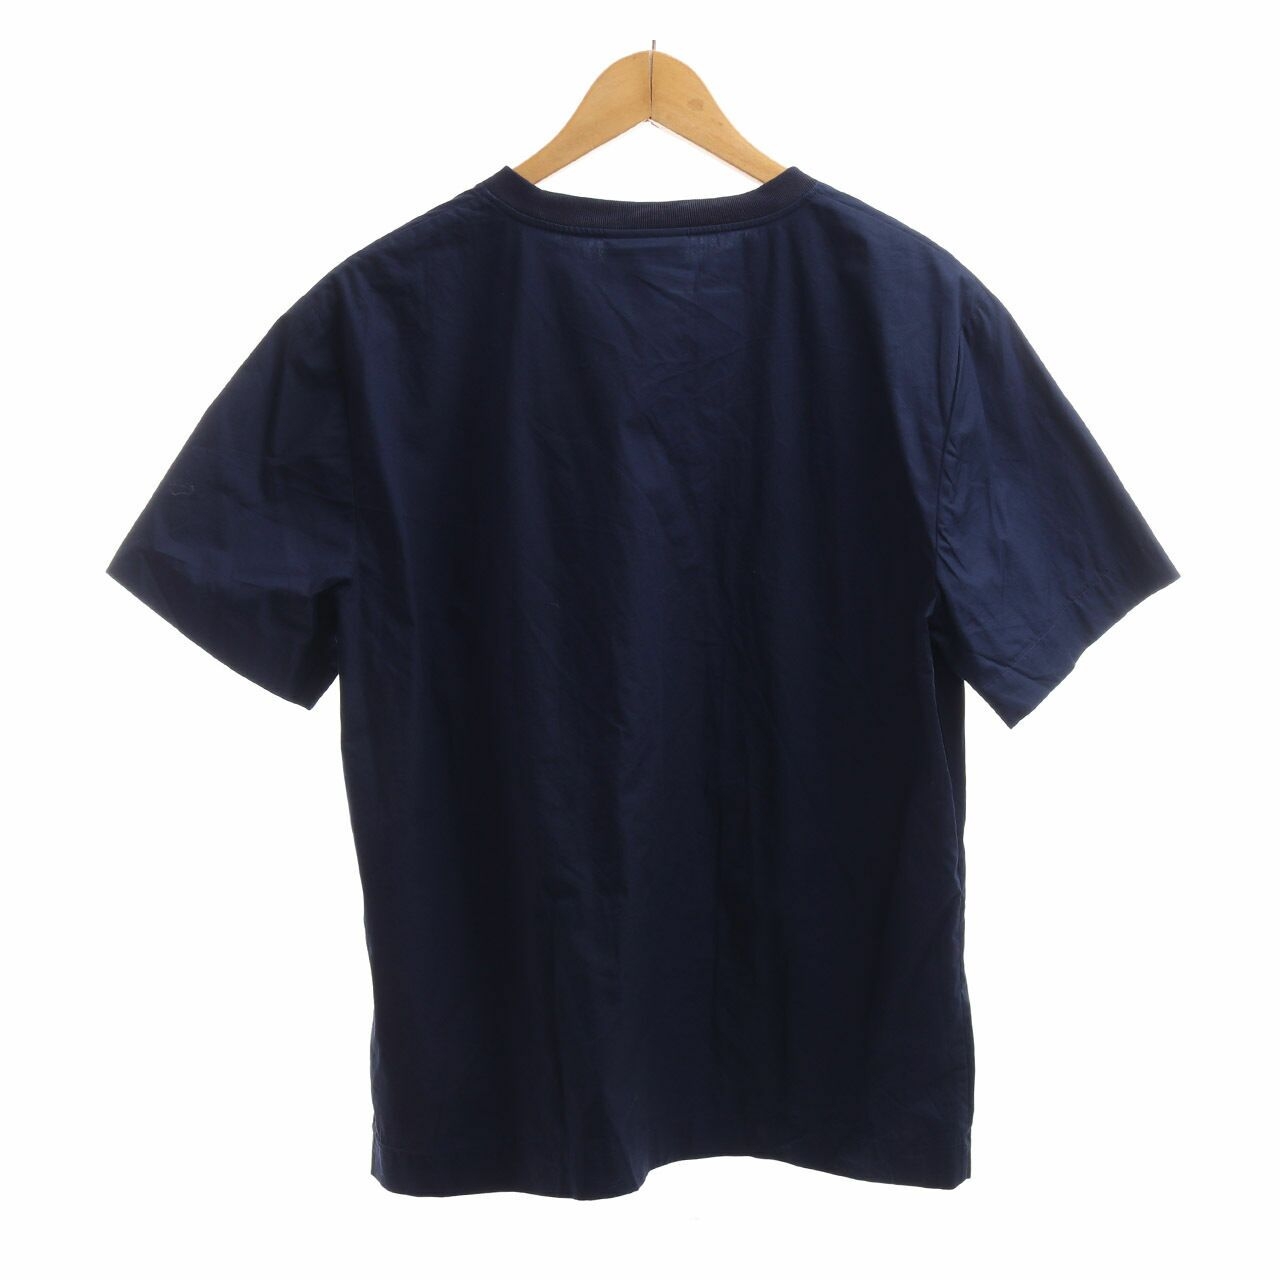 Lacoste Navy T-Shirt